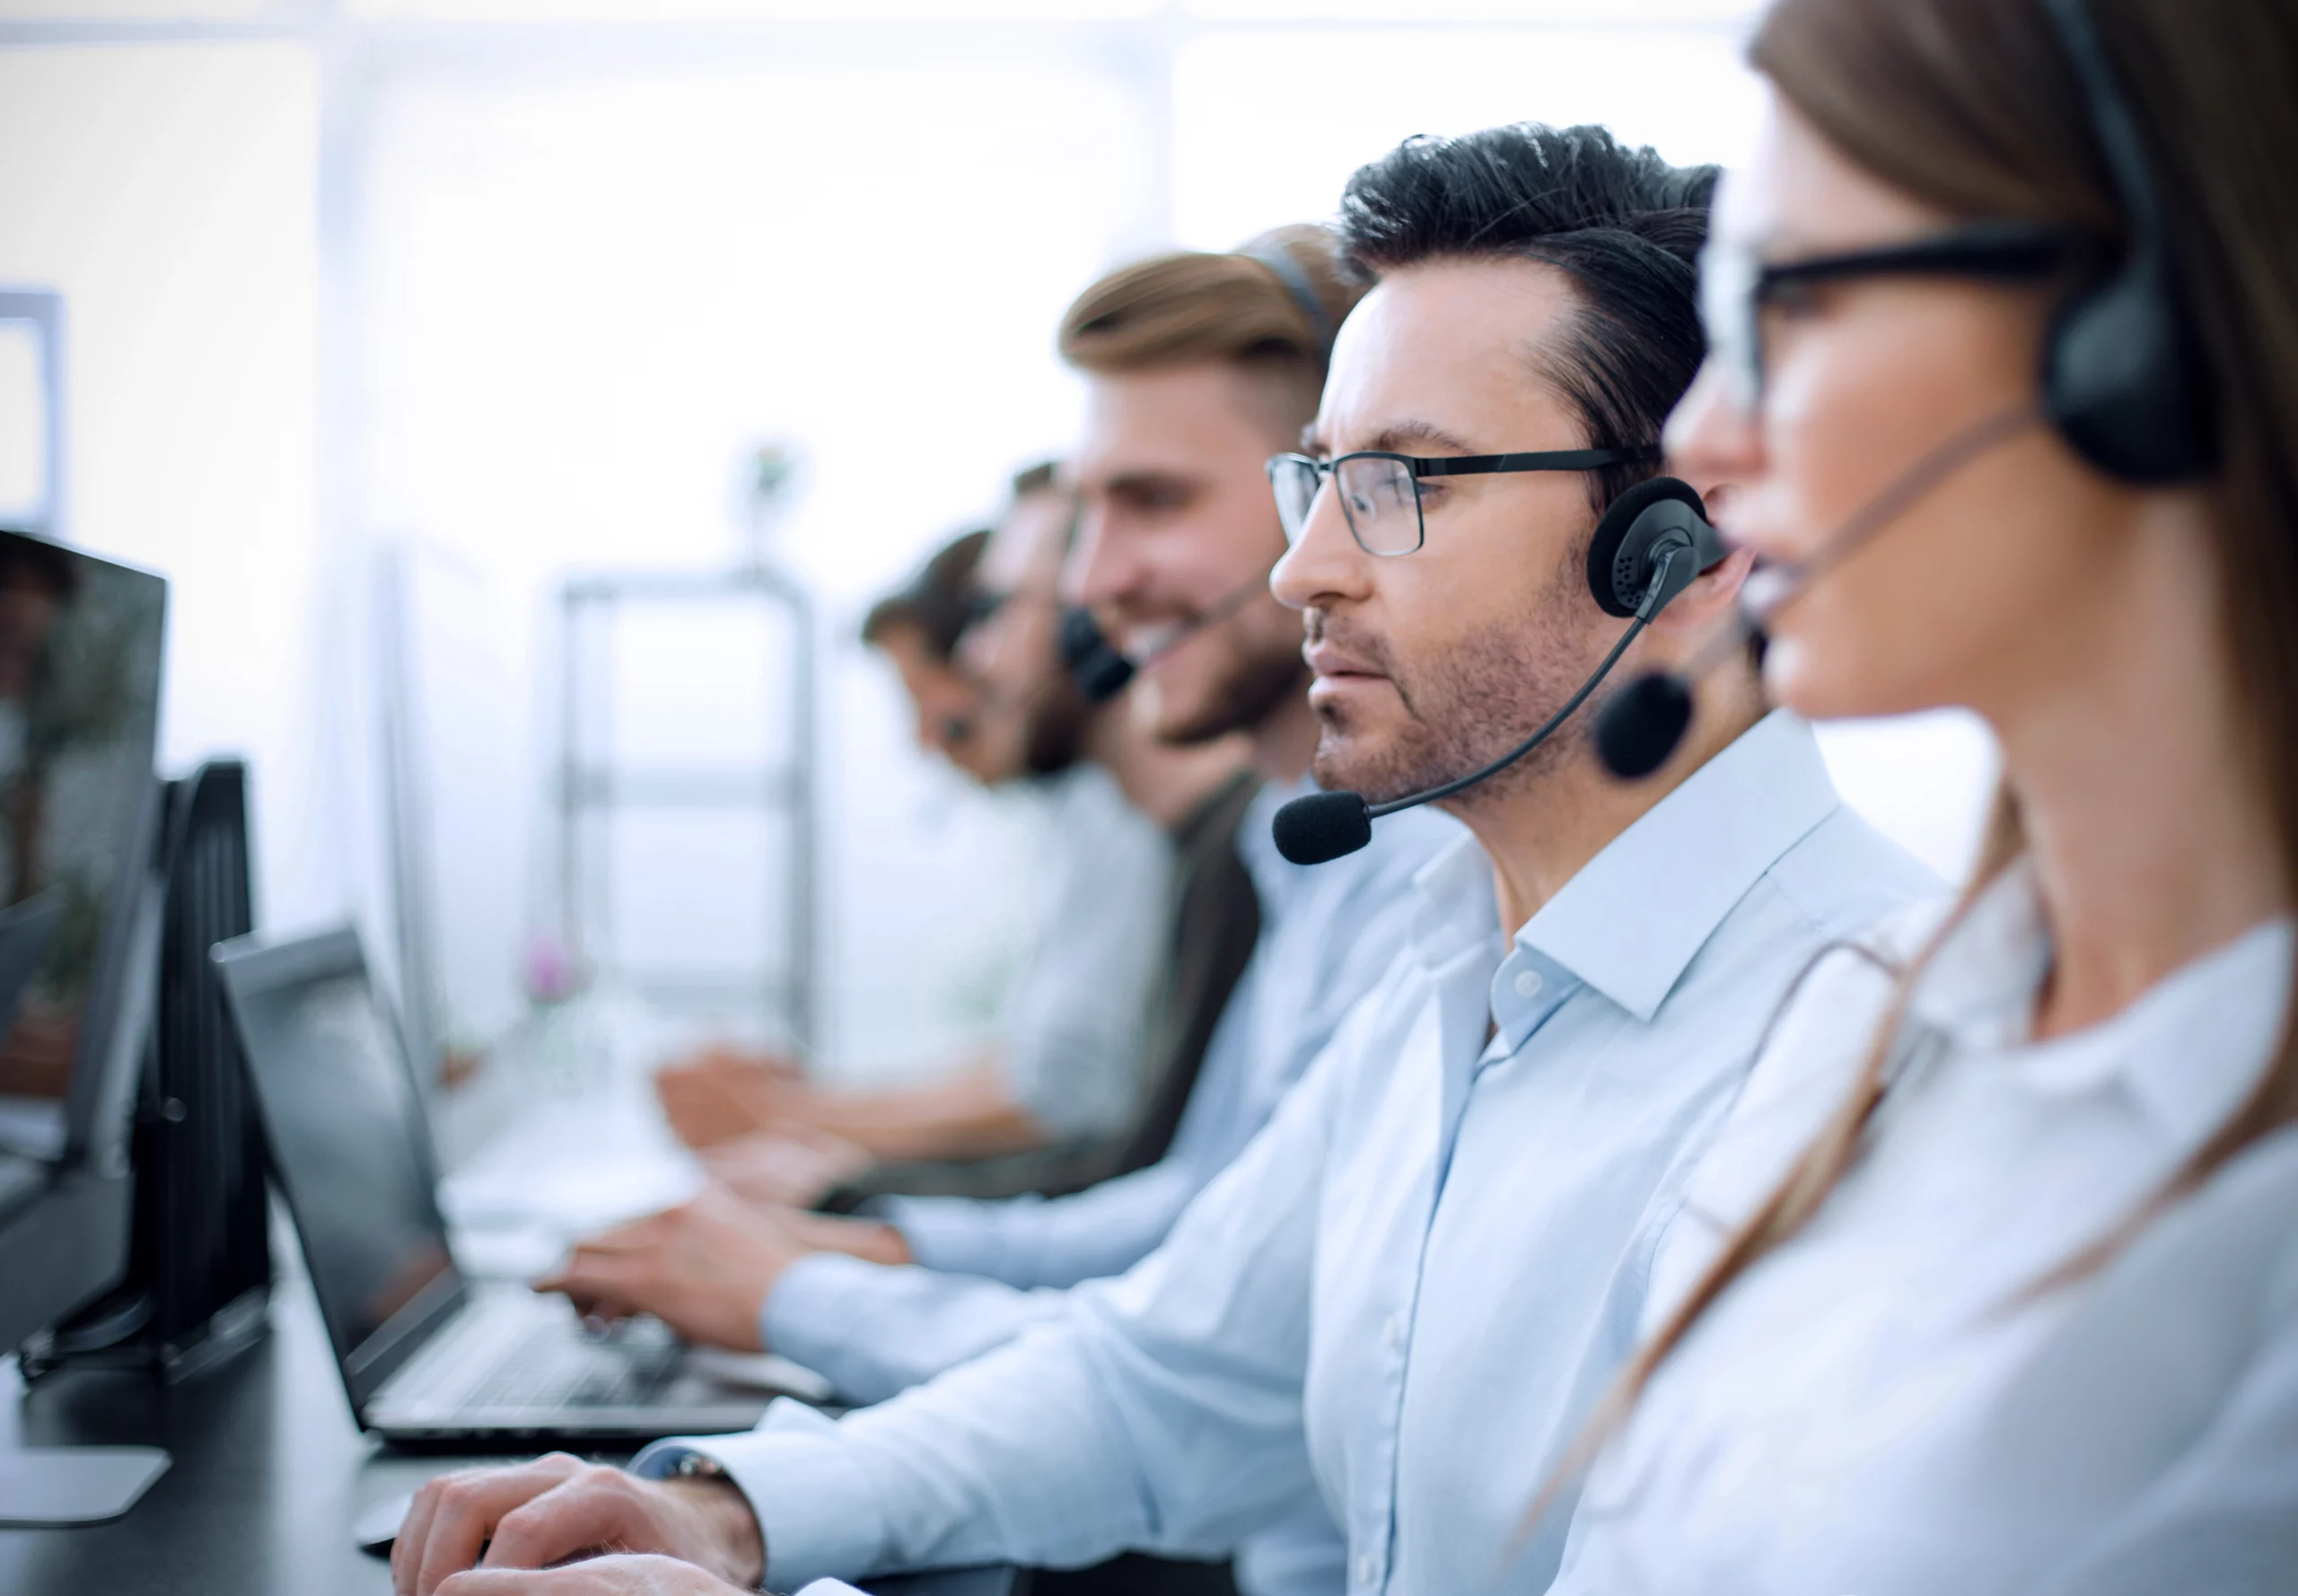 Helpdesk Support: Types and Benefits